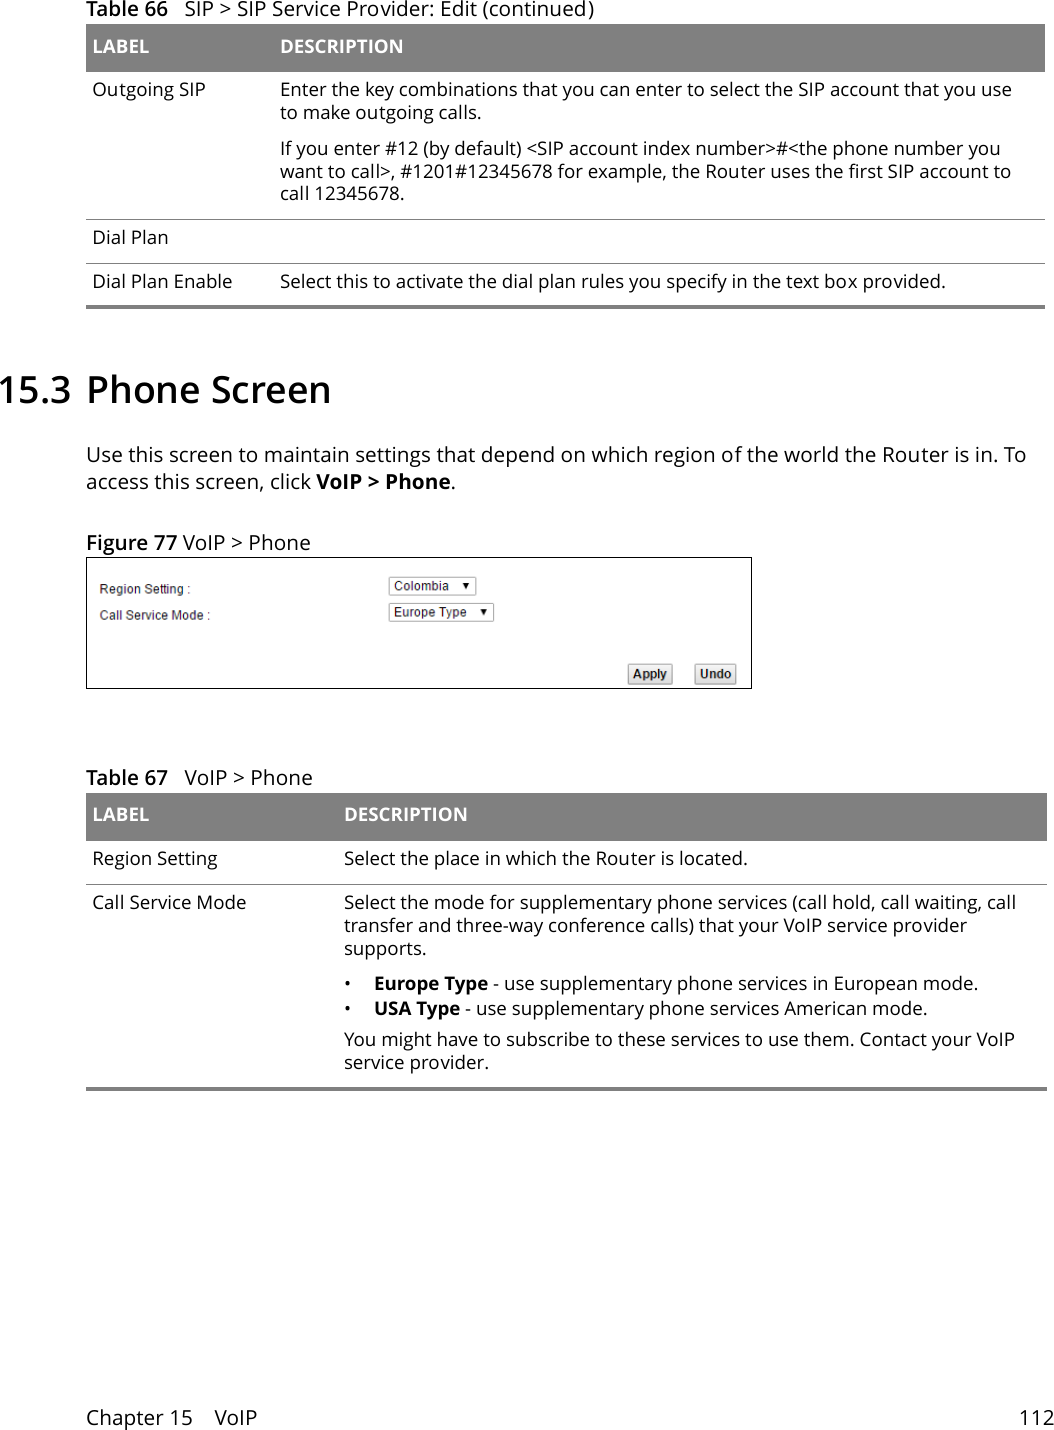 Chapter 15    VoIP 11215.3 Phone ScreenUse this screen to maintain settings that depend on which region of the world the Router is in. To access this screen, click VoIP &gt; Phone.Figure 77 VoIP &gt; PhoneTable 67   VoIP &gt; PhoneLABEL DESCRIPTIONRegion Setting Select the place in which the Router is located.Call Service Mode Select the mode for supplementary phone services (call hold, call waiting, call transfer and three-way conference calls) that your VoIP service provider supports.•Europe Type - use supplementary phone services in European mode.•USA Type - use supplementary phone services American mode.You might have to subscribe to these services to use them. Contact your VoIP service provider.Outgoing SIP Enter the key combinations that you can enter to select the SIP account that you use to make outgoing calls. If you enter #12 (by default) &lt;SIP account index number&gt;#&lt;the phone number you want to call&gt;, #1201#12345678 for example, the Router uses the first SIP account to call 12345678.Dial PlanDial Plan Enable Select this to activate the dial plan rules you specify in the text box provided. Table 66   SIP &gt; SIP Service Provider: Edit (continued)LABEL DESCRIPTION